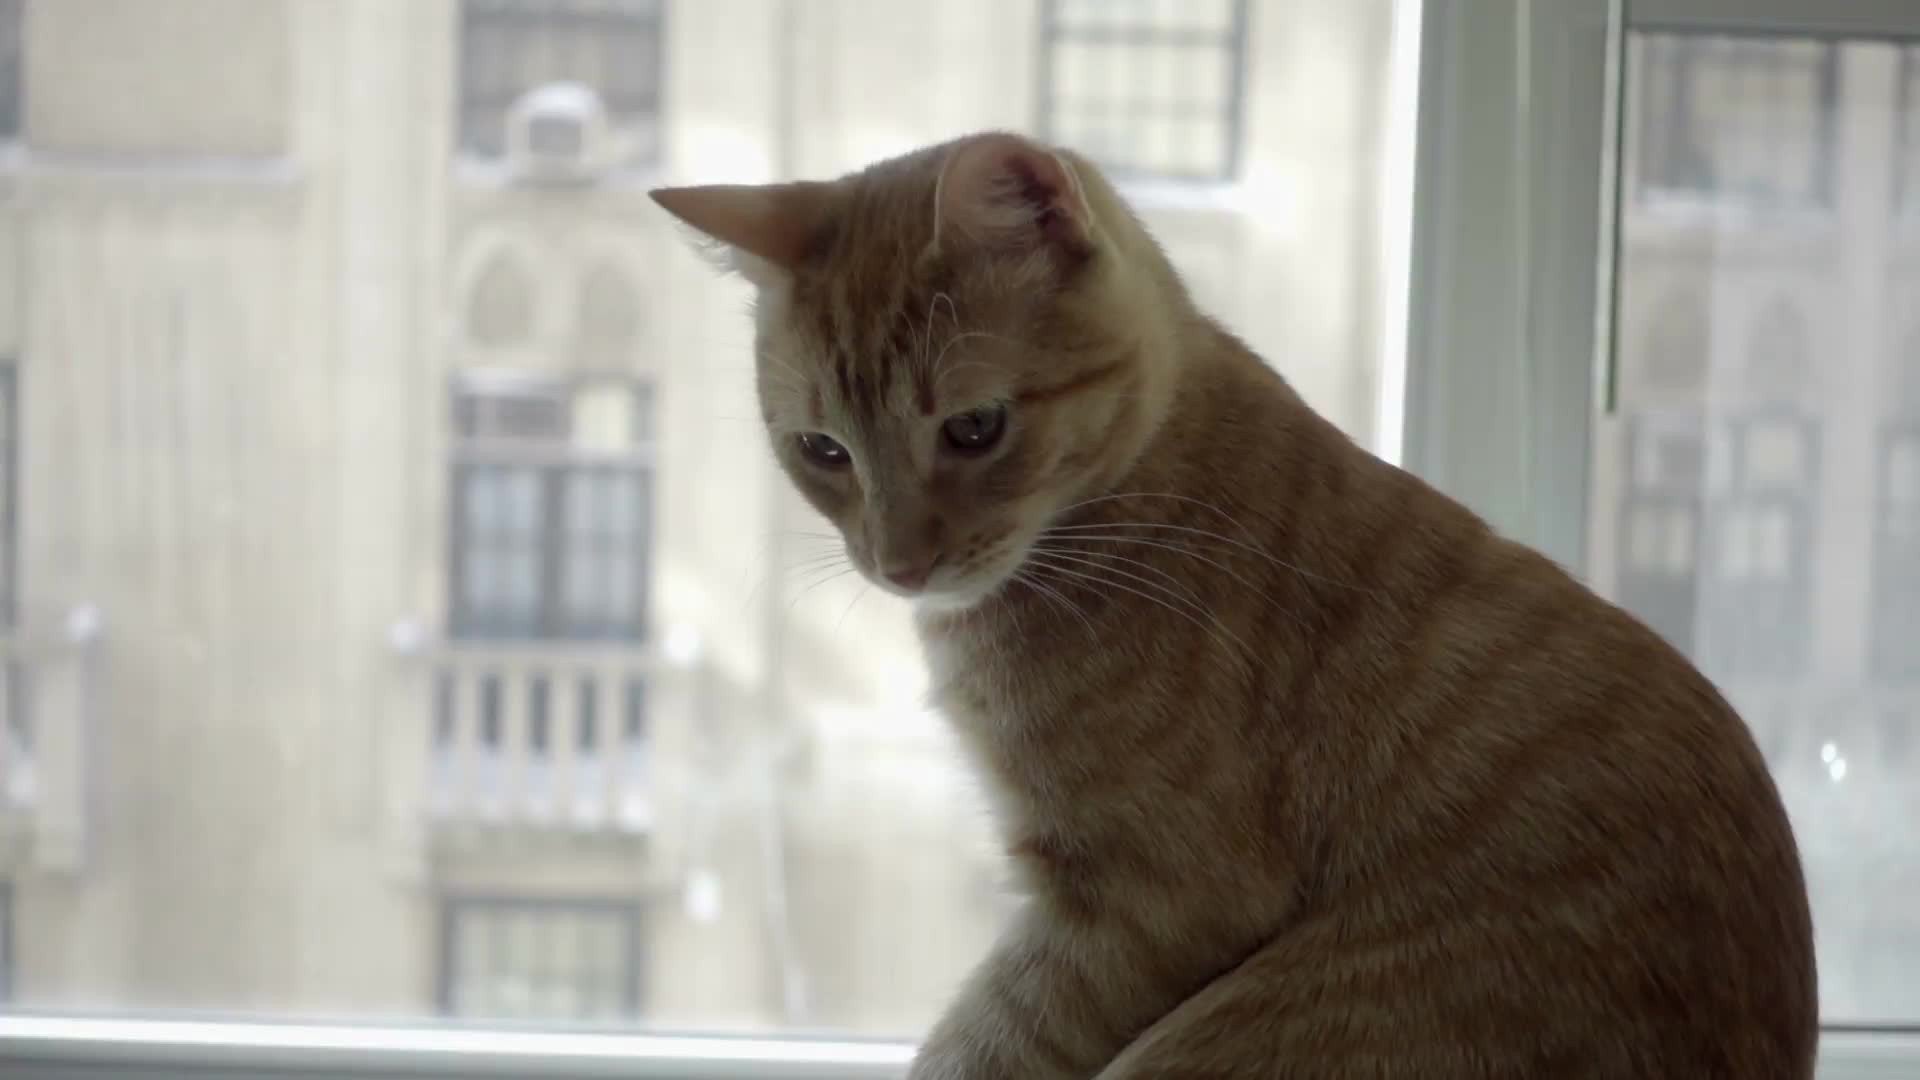 orange tabby cat on window sill with view of Manhattan buildings in background in NYC